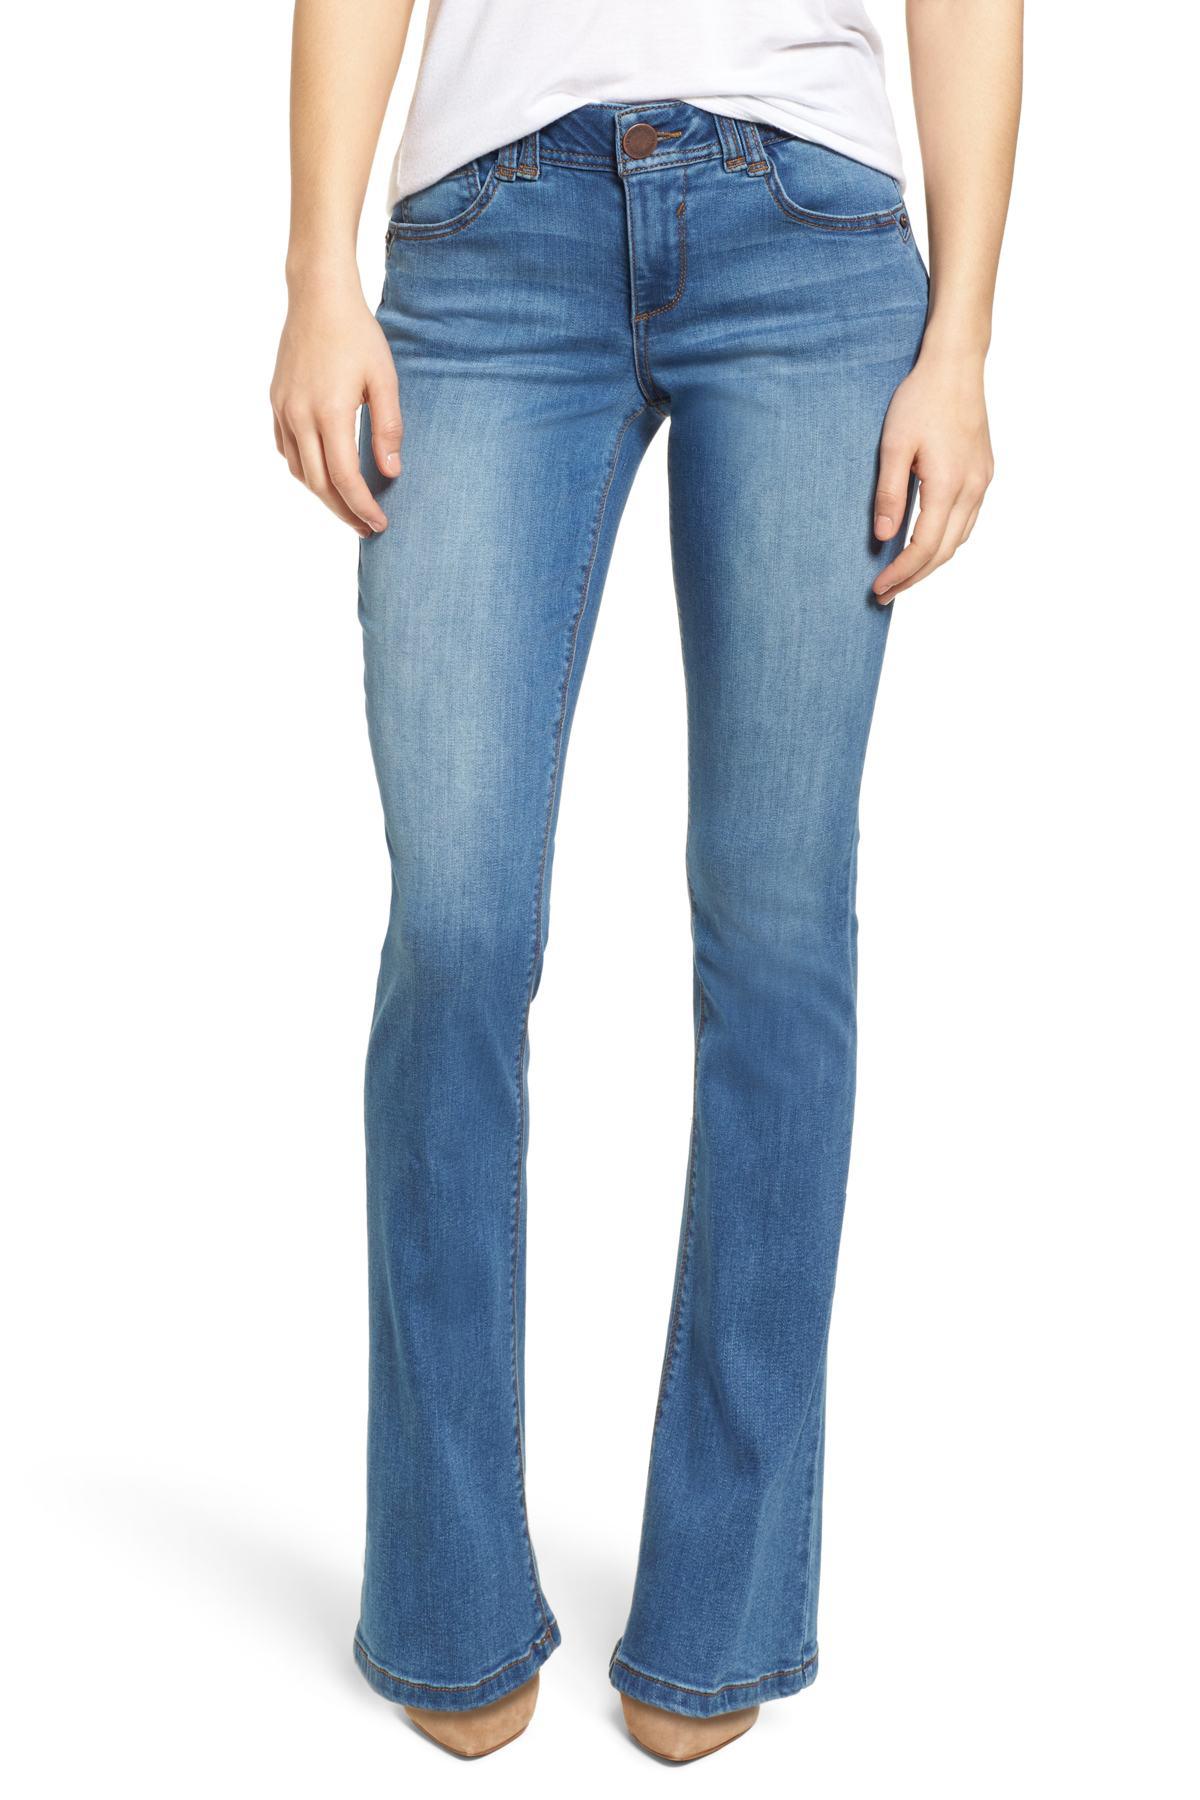 Wit & Wisdom Ab-solution Itty Bitty Bootcut Jeans in Blue | Lyst